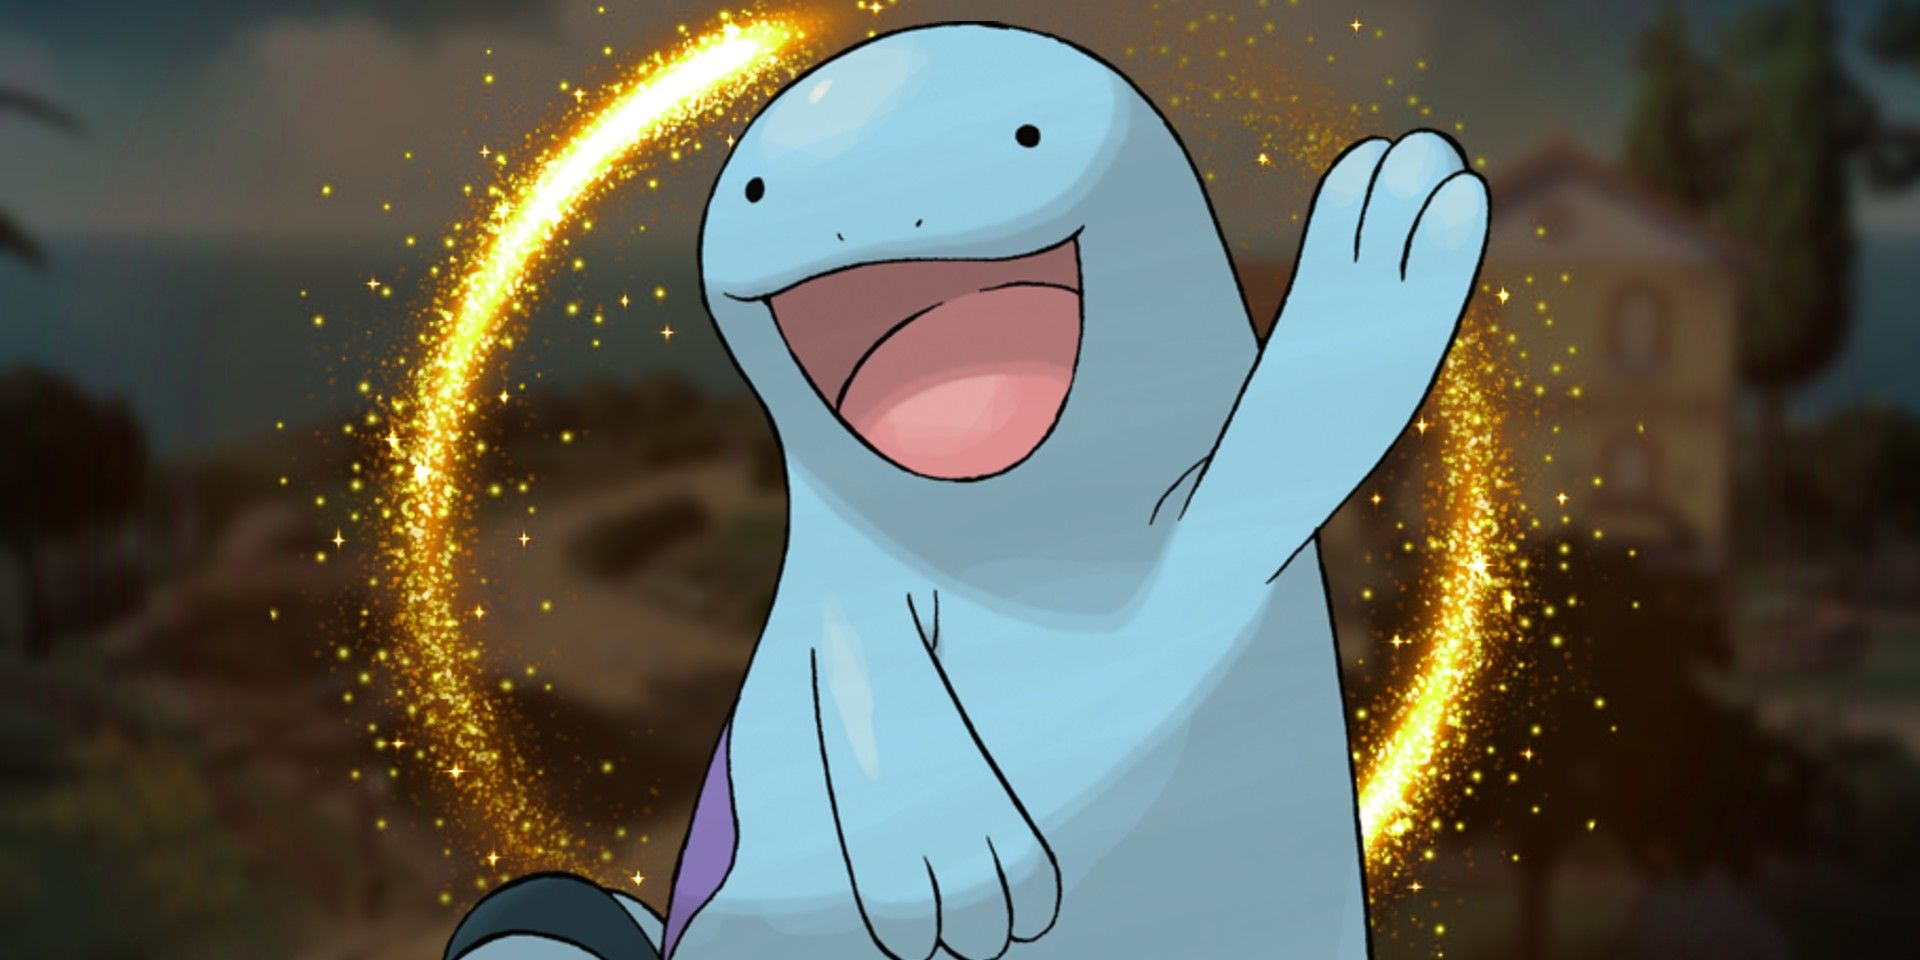 A Quagsire smiles and lifts its left paw while a yellow energy circles behind it. In the background is the blurred-out image of the Trainer's house in Paldea.